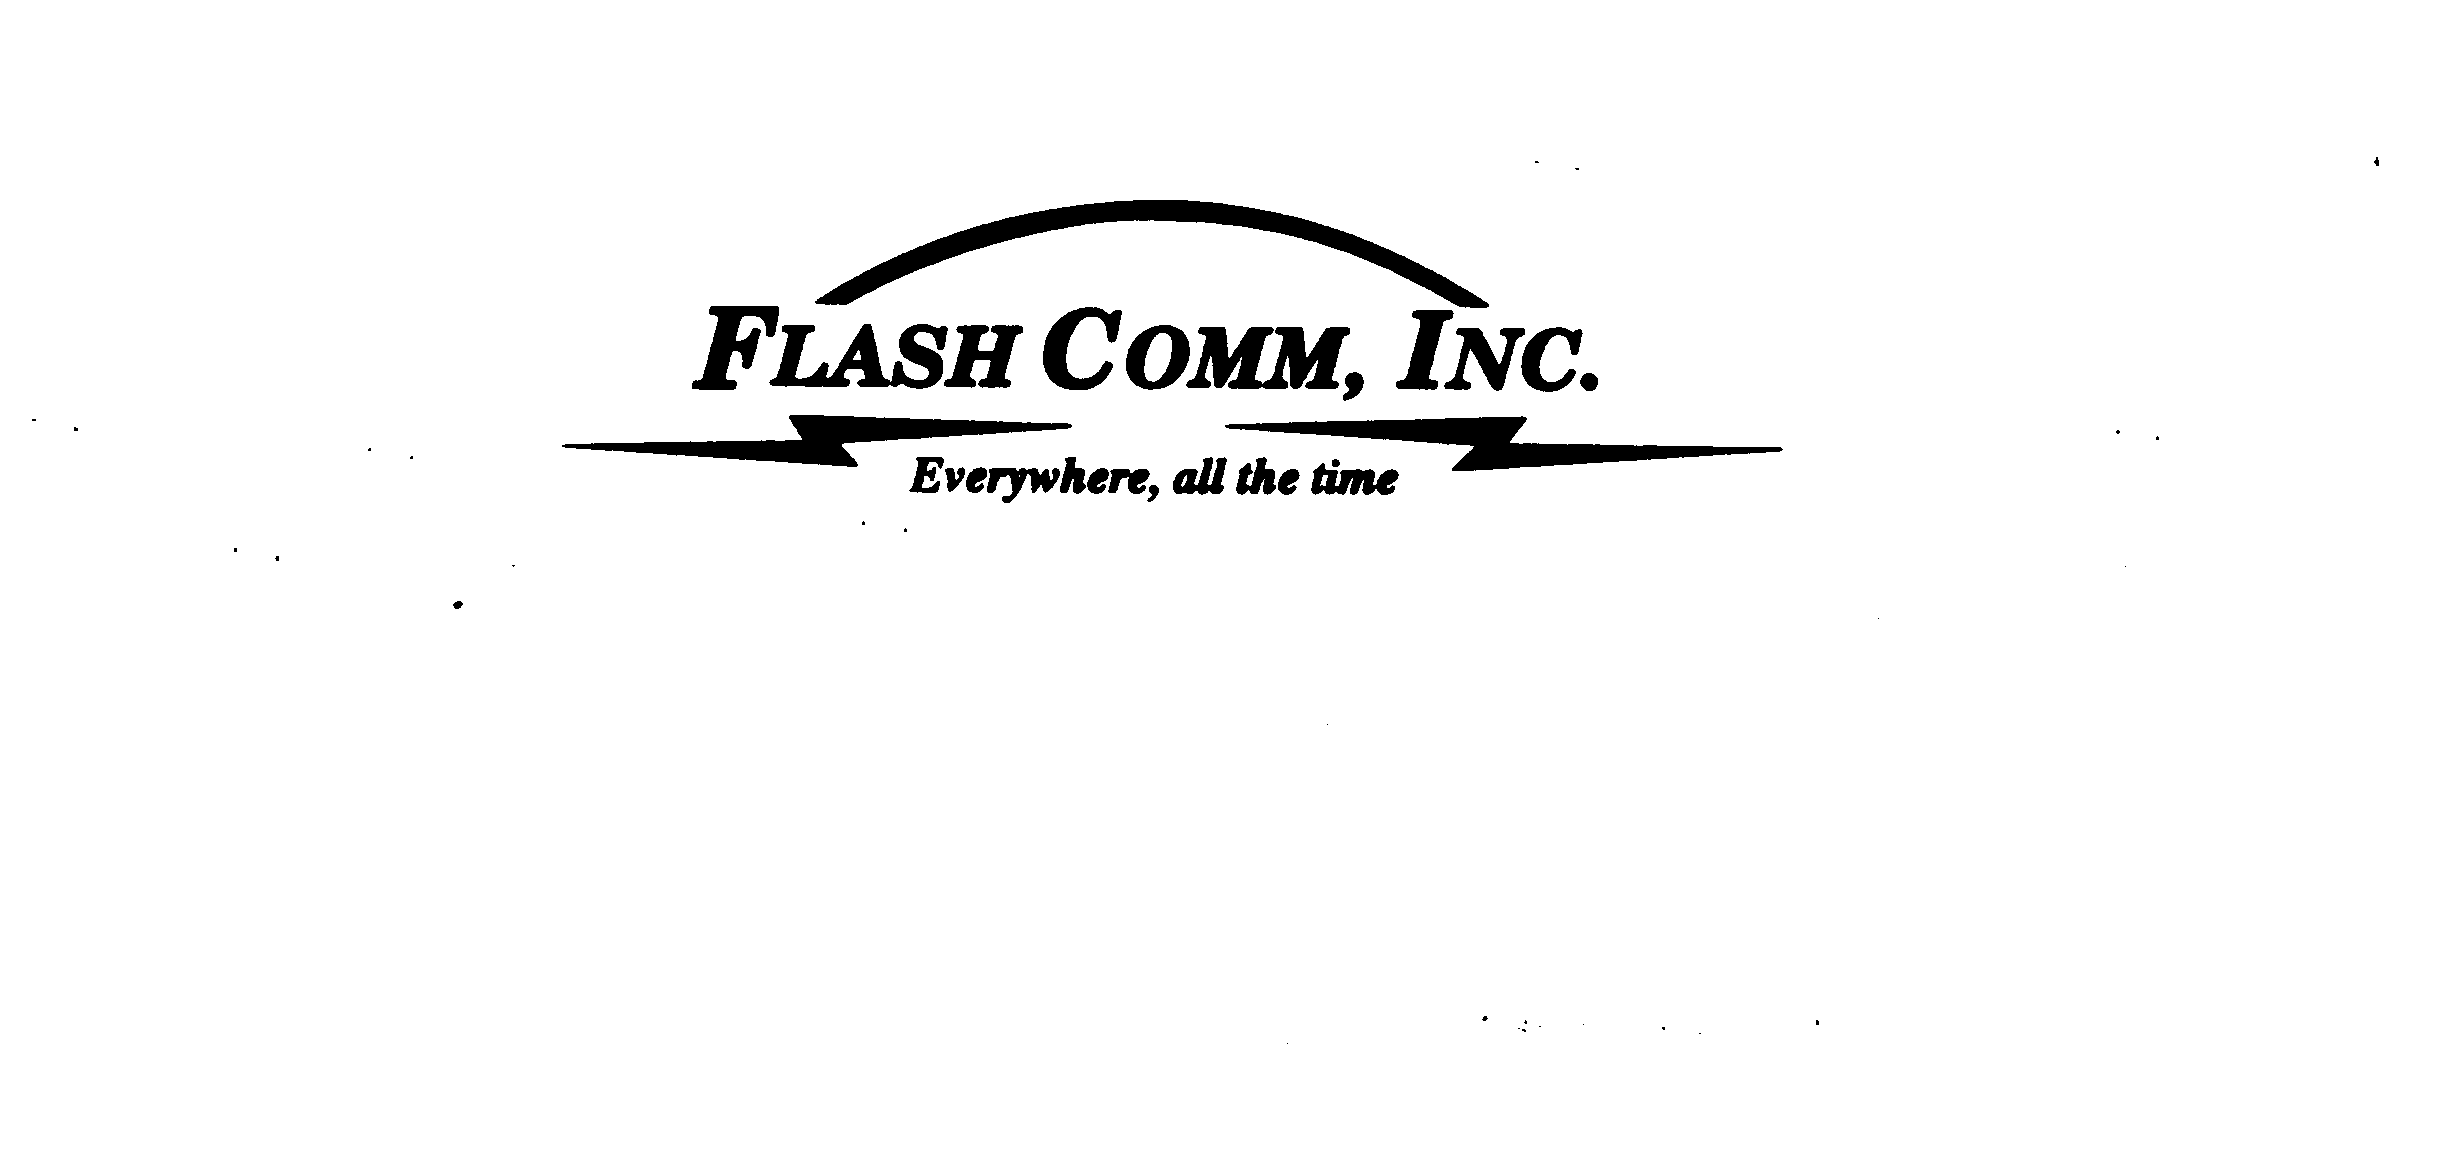  FLASH COMM, INC. EVERYWHERE, ALL THE TIME